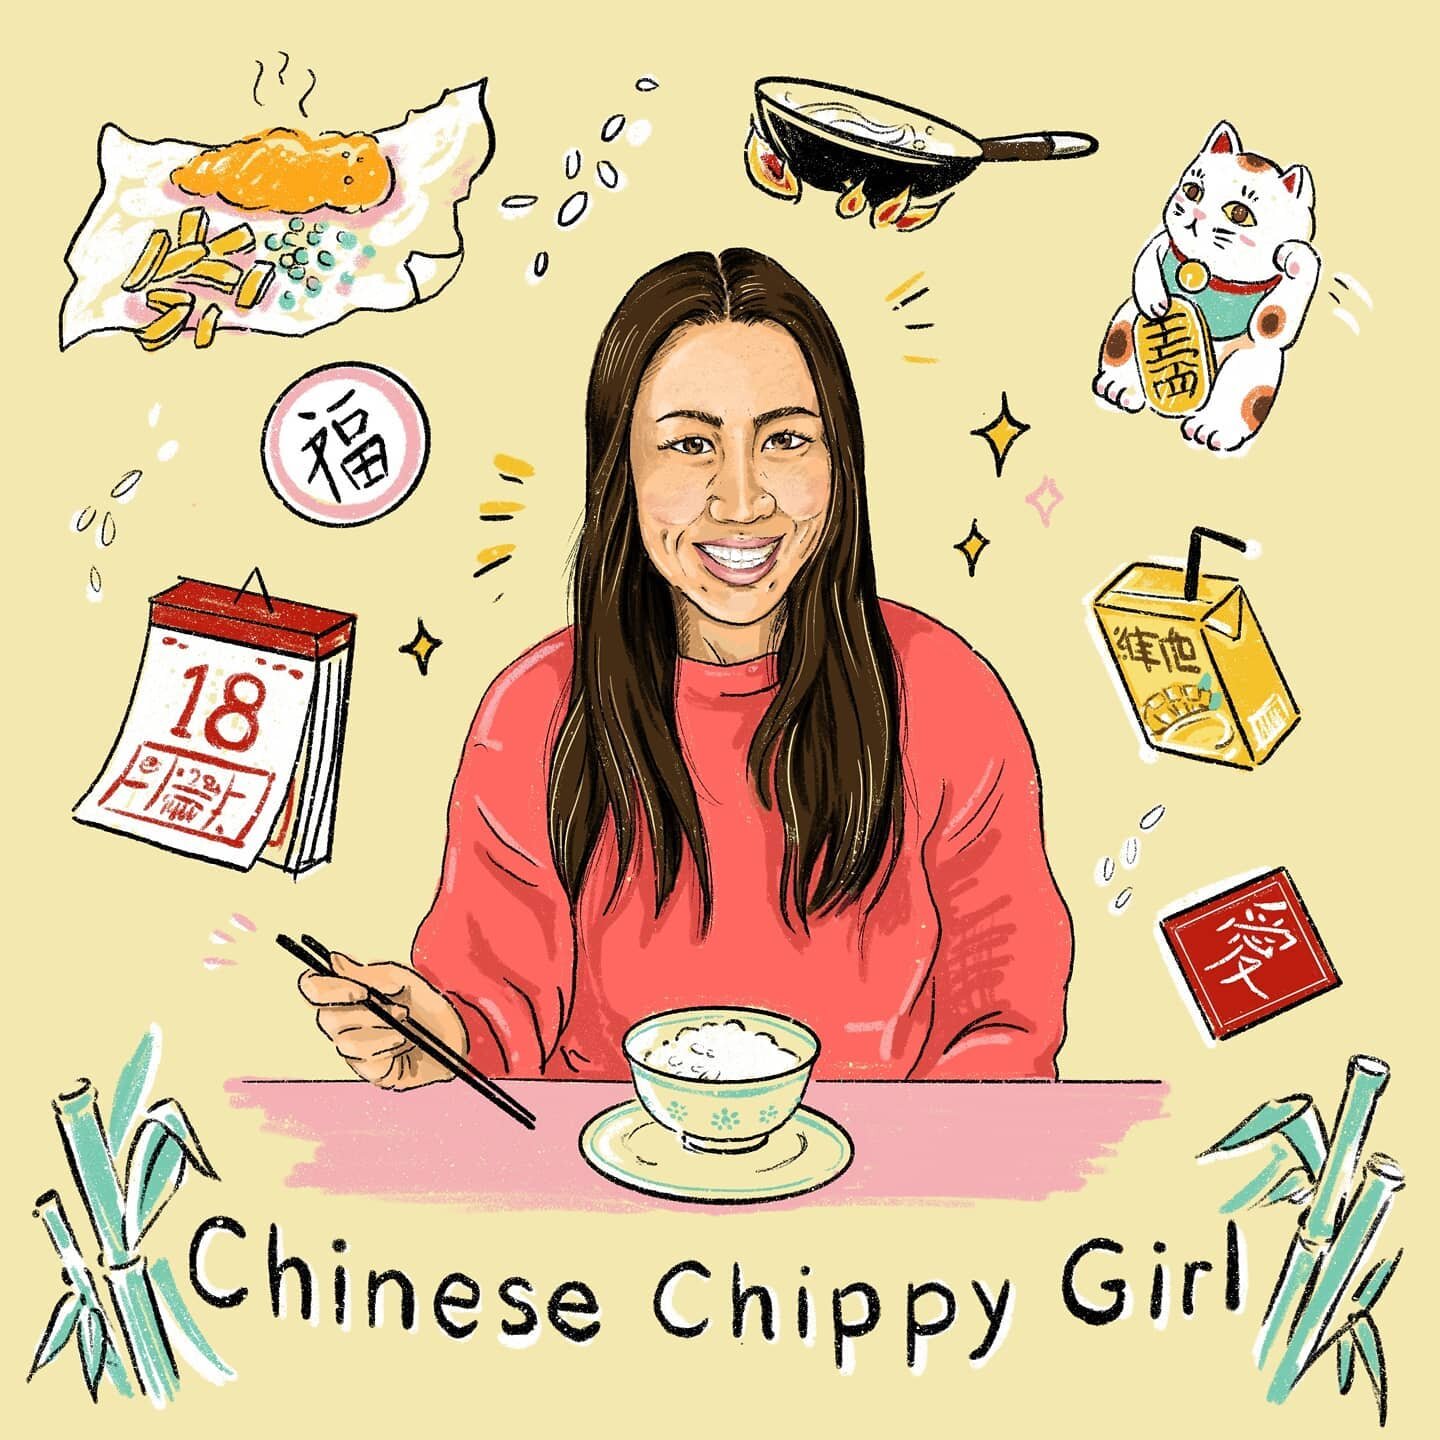 Chinese Chippy Girl podcast @chinesechippygirl : Episode 3 featuring meeee
.
I dont believe in fate or serendipity per say, but through my illustrations and IG, I met my namesake Georgie Ma.. and it felt like for the first time someone could relate. 